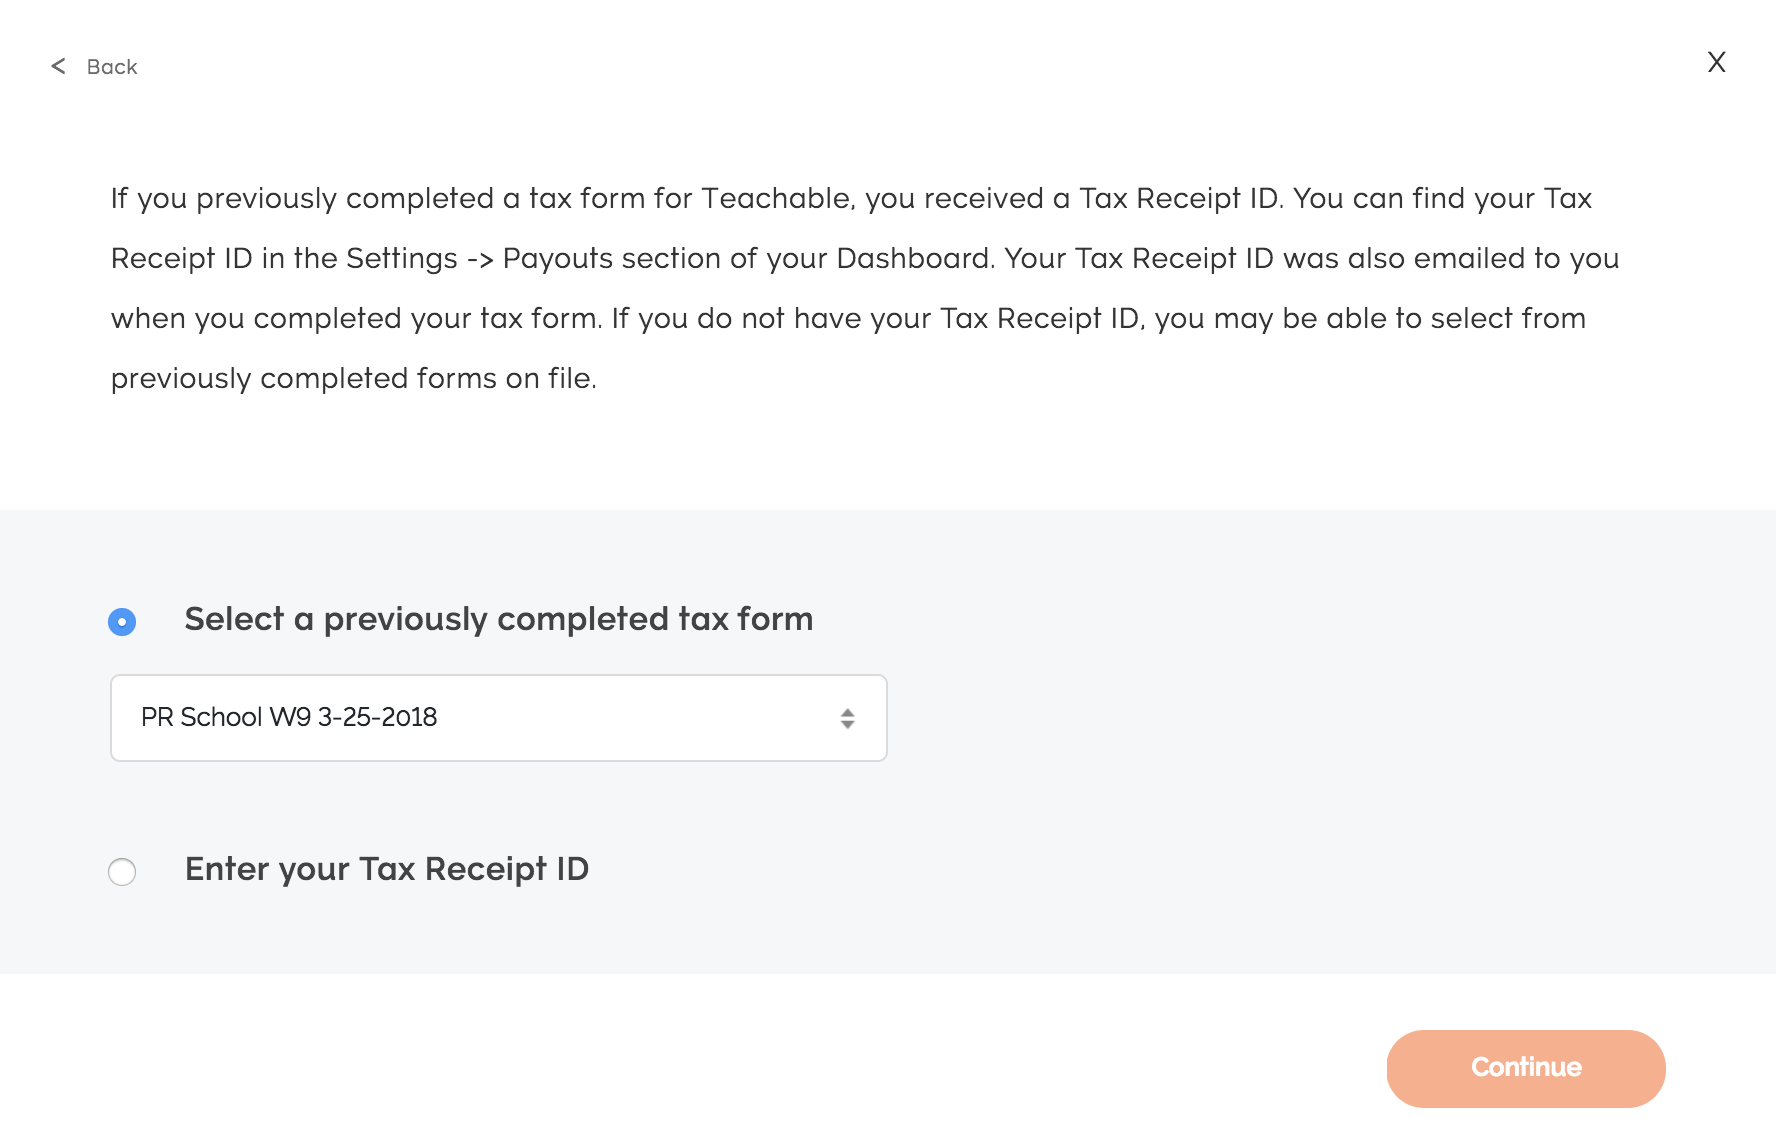 admin-dashboard-tax-modal-banner-yes-button-select-previously-completed-tax-form.png